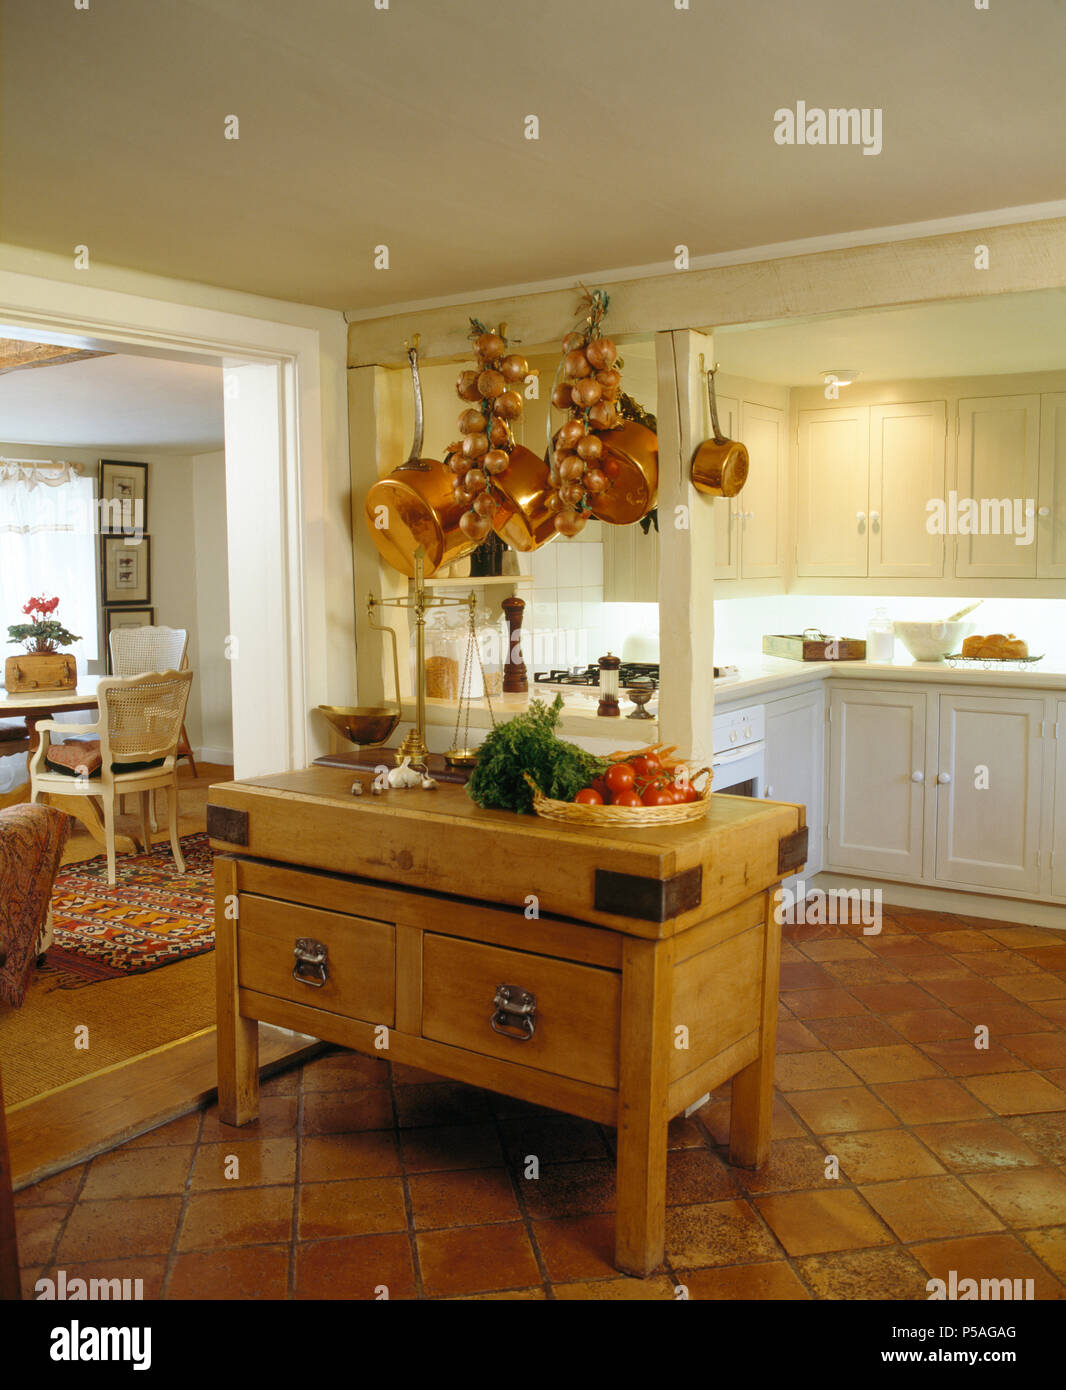 Copper pans and strings of onions hanging from beam above butcher's block in kitchen with terracotta tiled floor Stock Photo